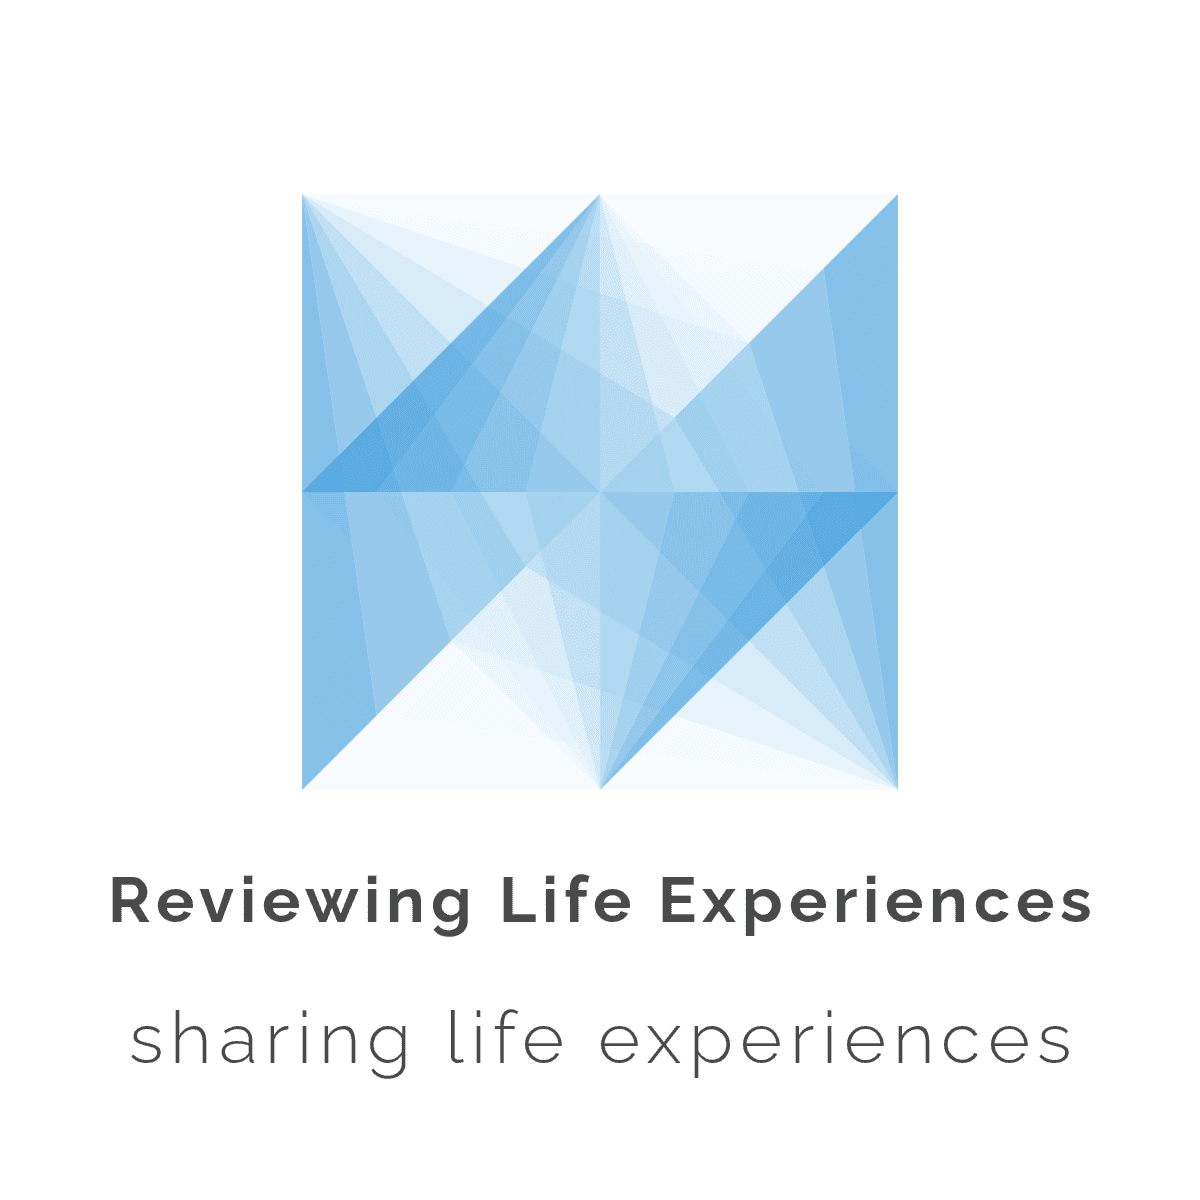 Reviewing Life Experiences